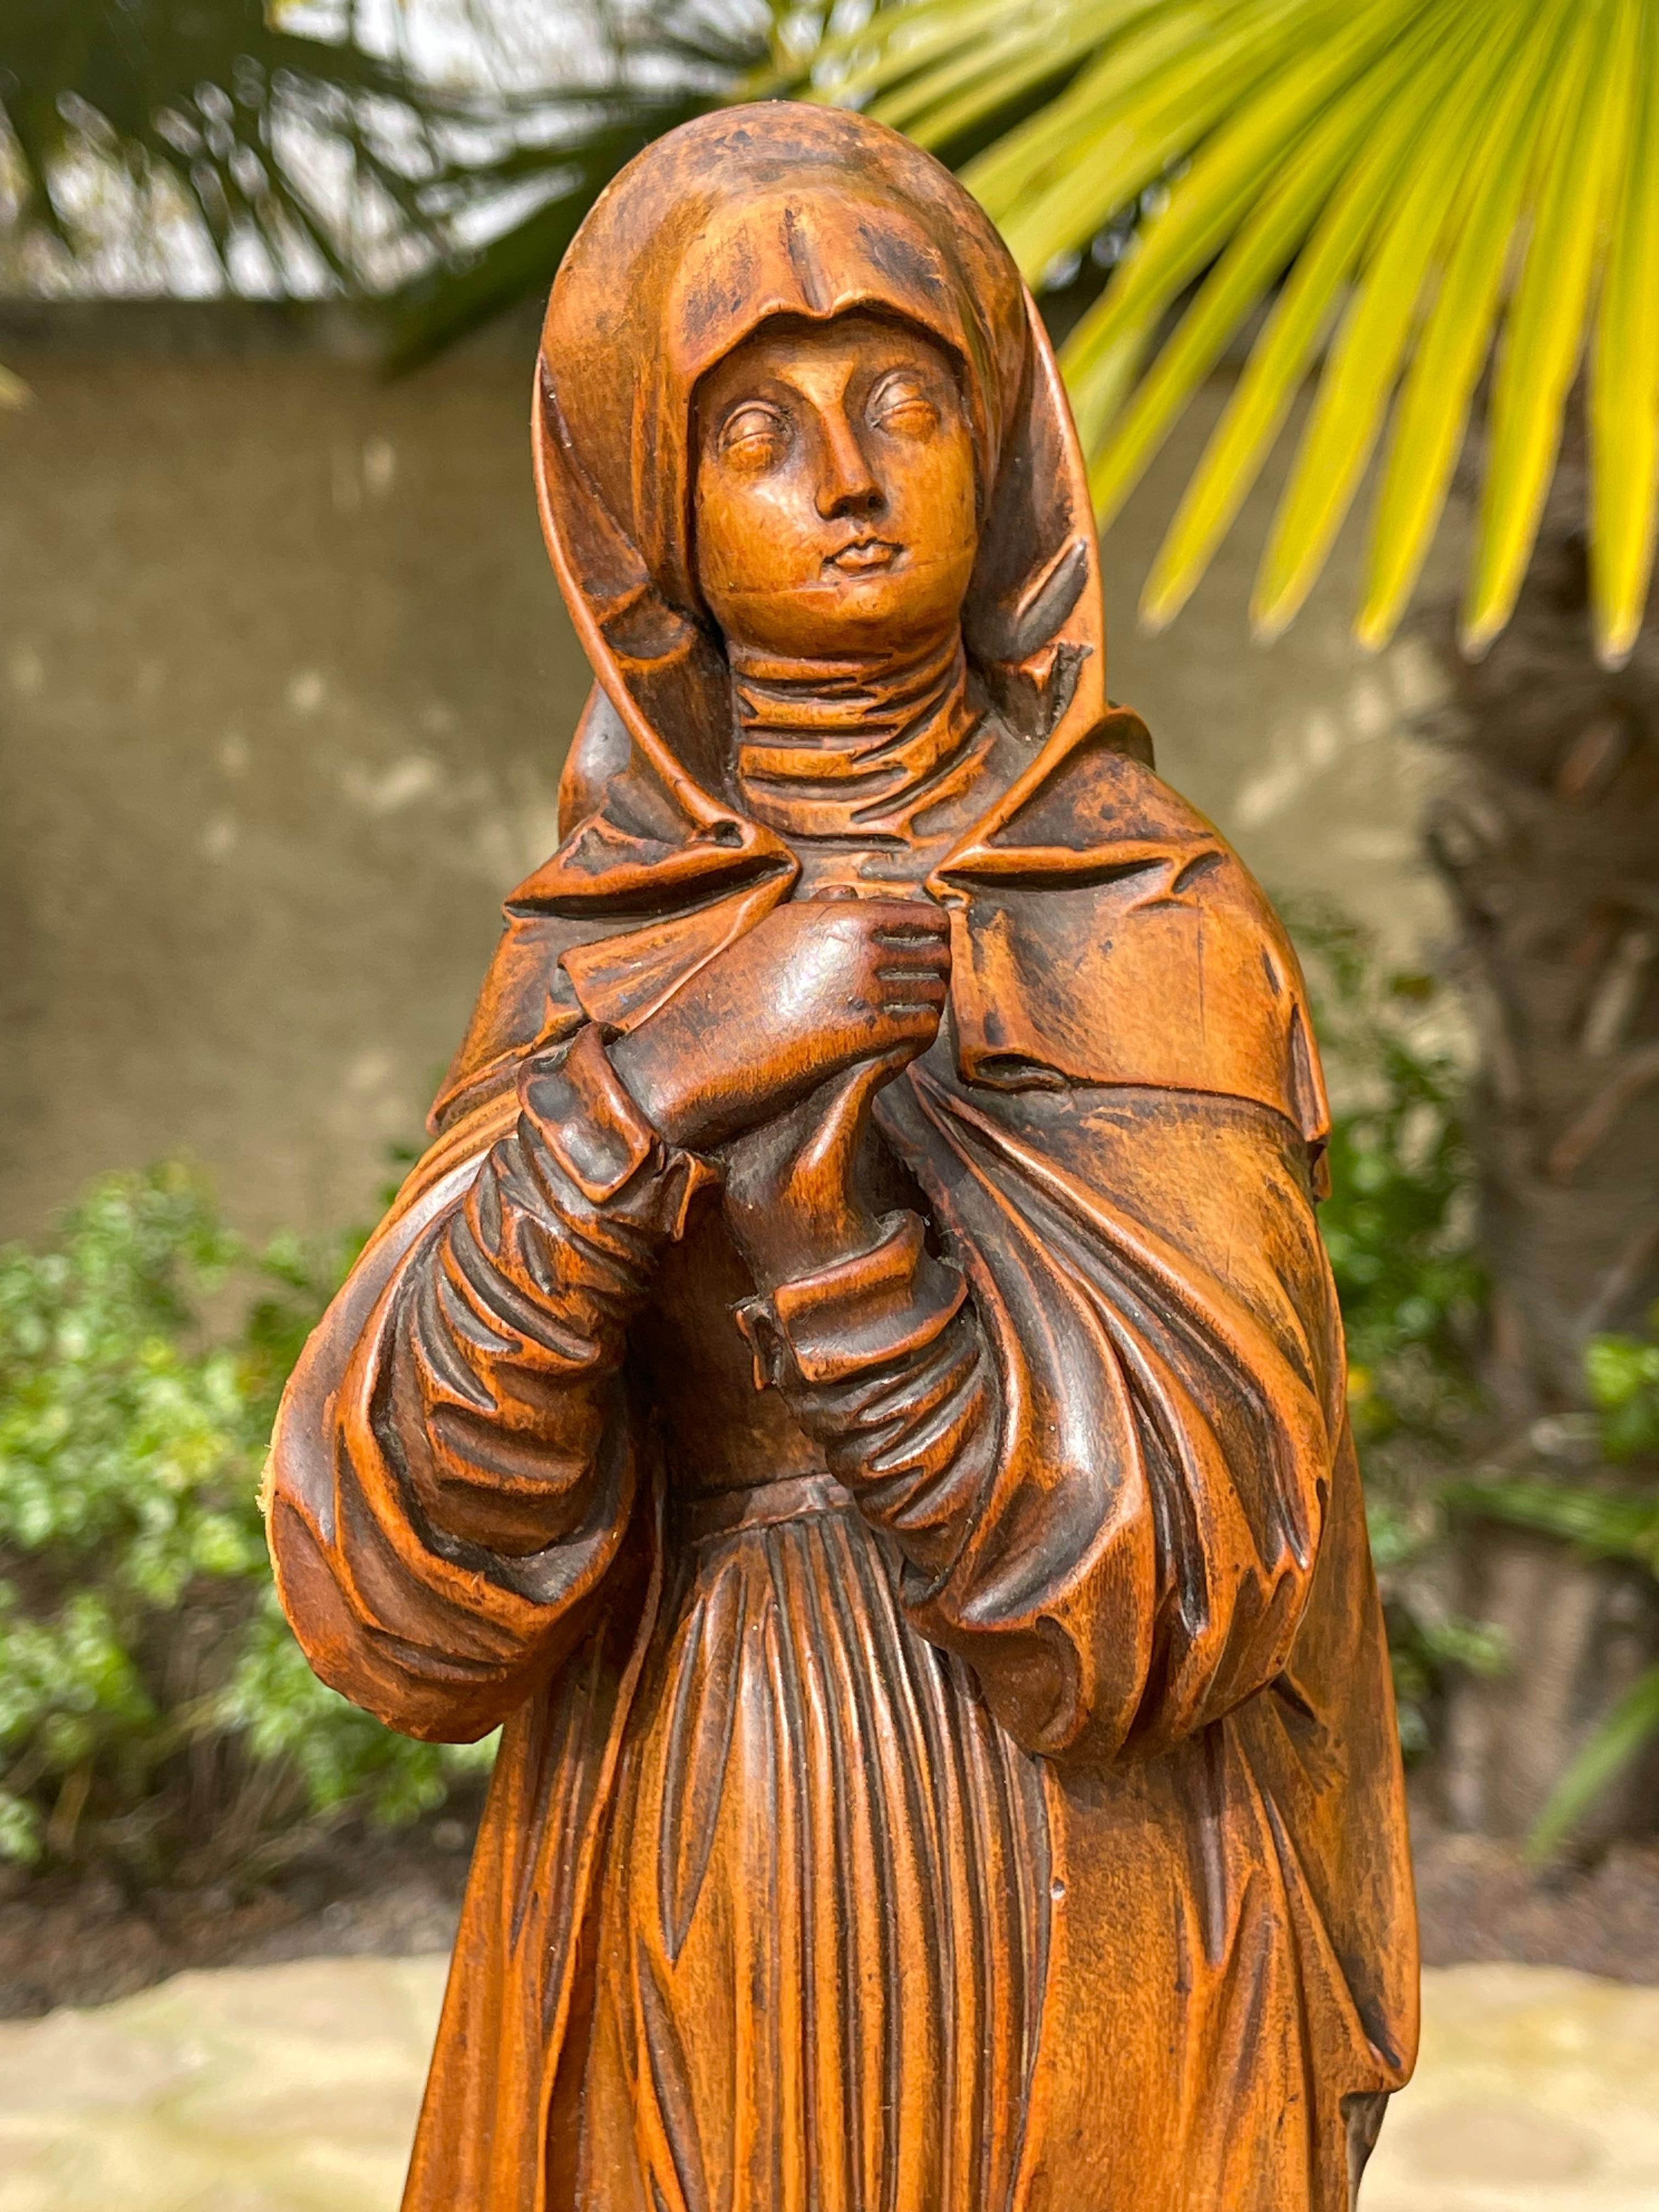 Virgin of Nuremberg in carved boxwood in very good condition. Model after the original dating from the 16th century and attributed to the famous late Gothic sculptor Adam Kraft (c. 1460? - 1509).

Dimensions
Height 40cm
Width 9.5cm
Depth 8.5cm